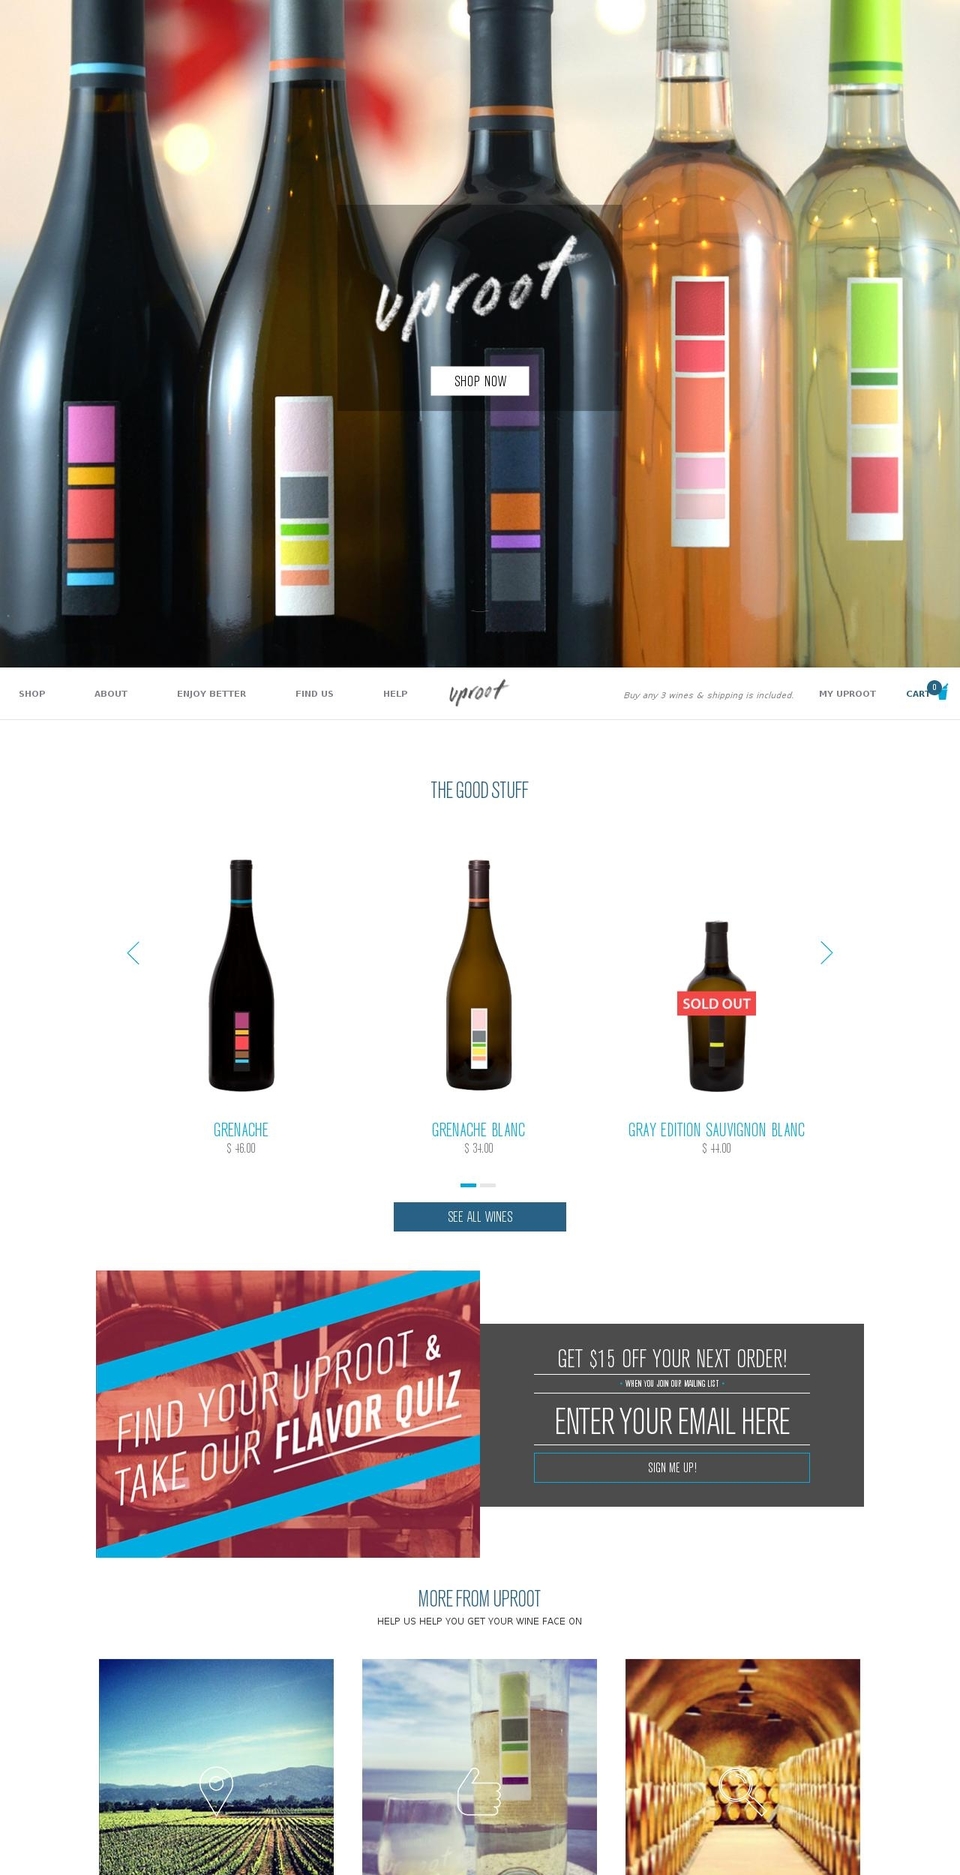 uproot-dev-myshopify-com-vpvuproot Shopify theme site example uprootwines.com